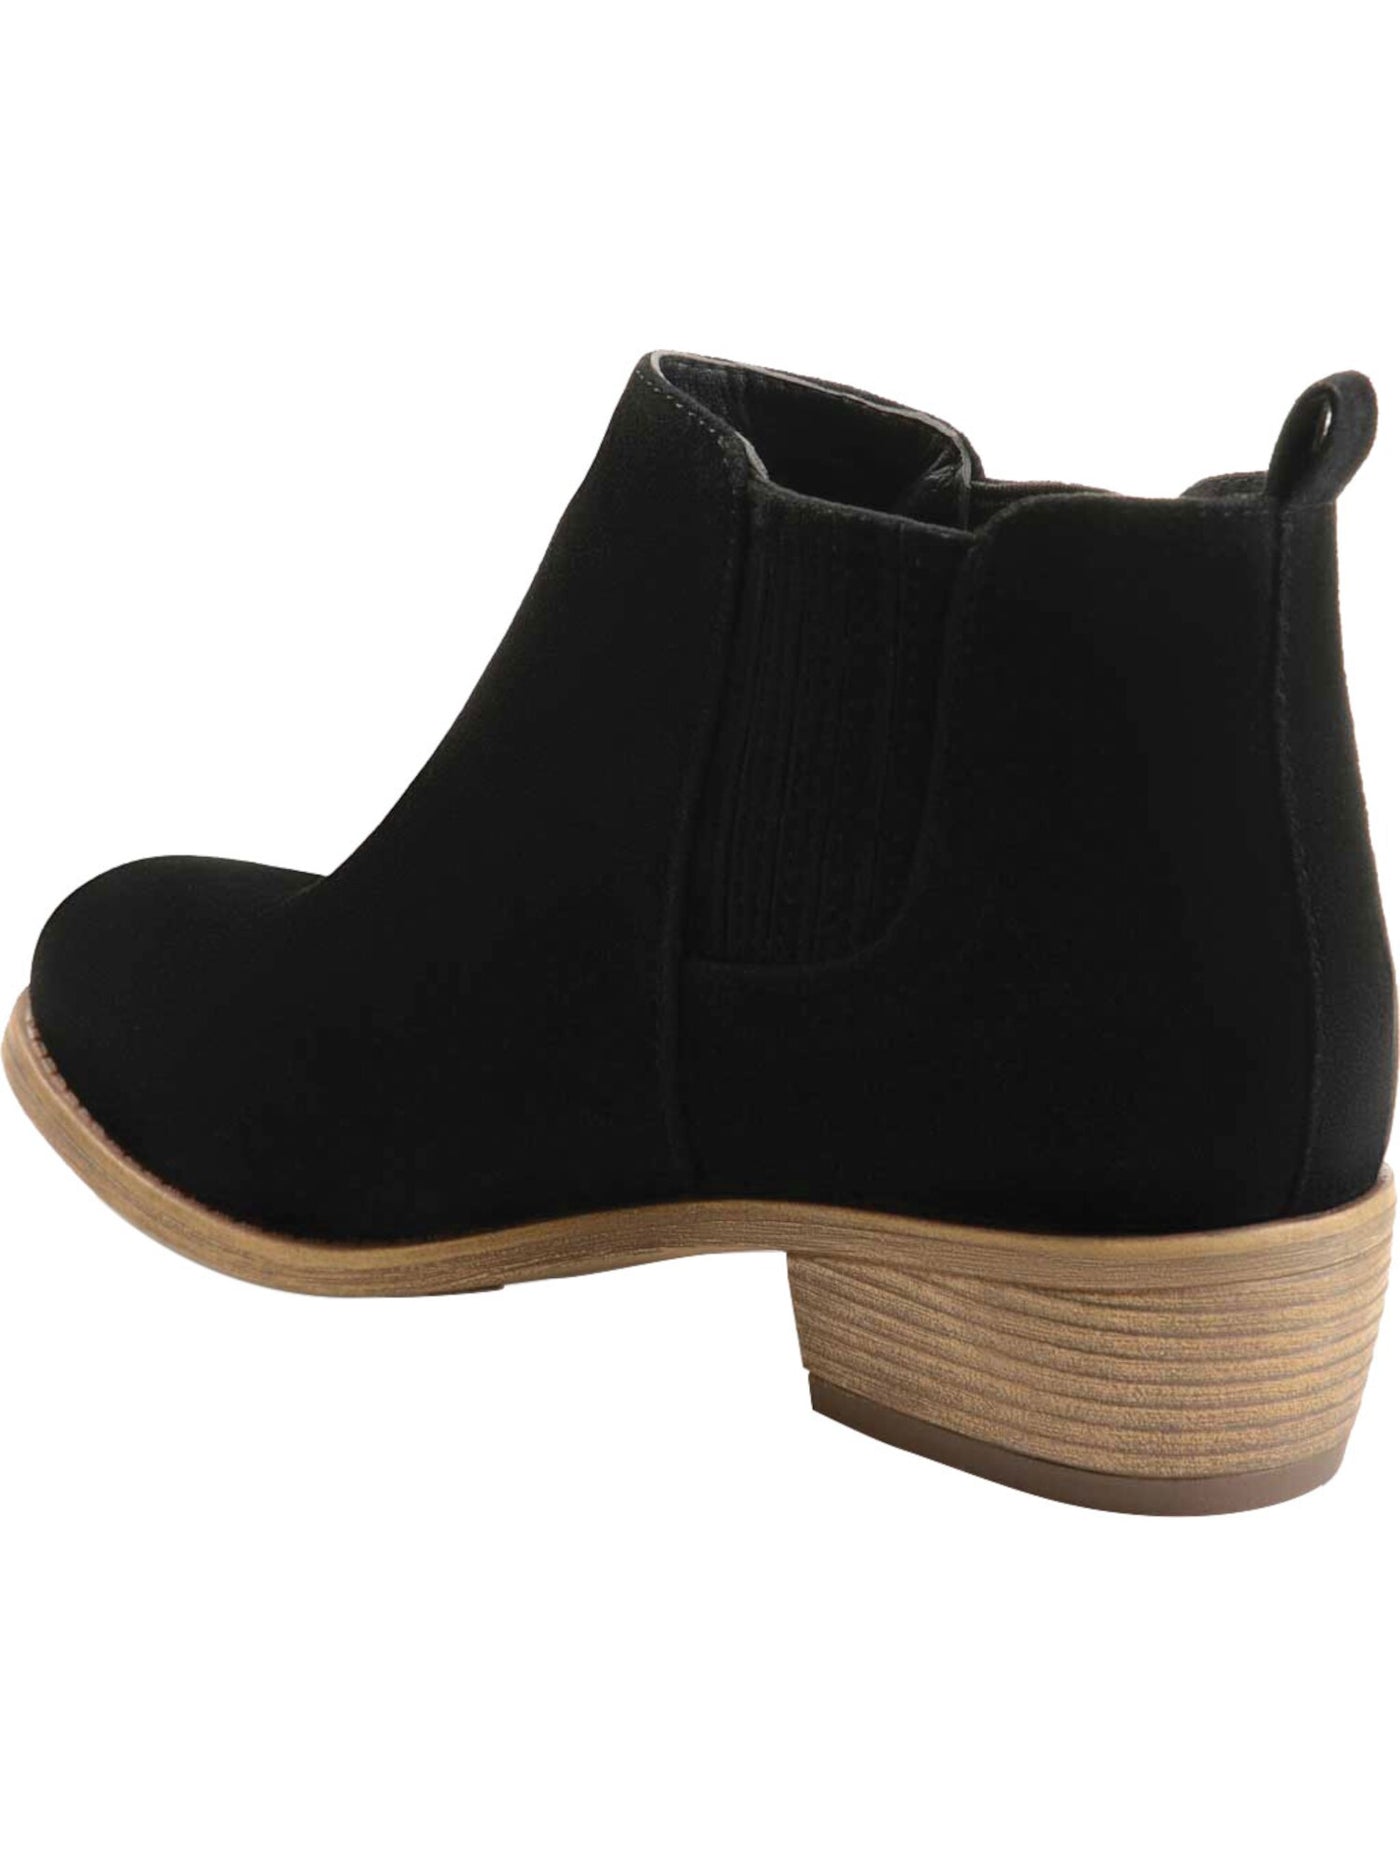 JOURNEE COLLECTION Womens Black Side Gores Cushioned Ramsey Almond Toe Block Heel Booties 7.5